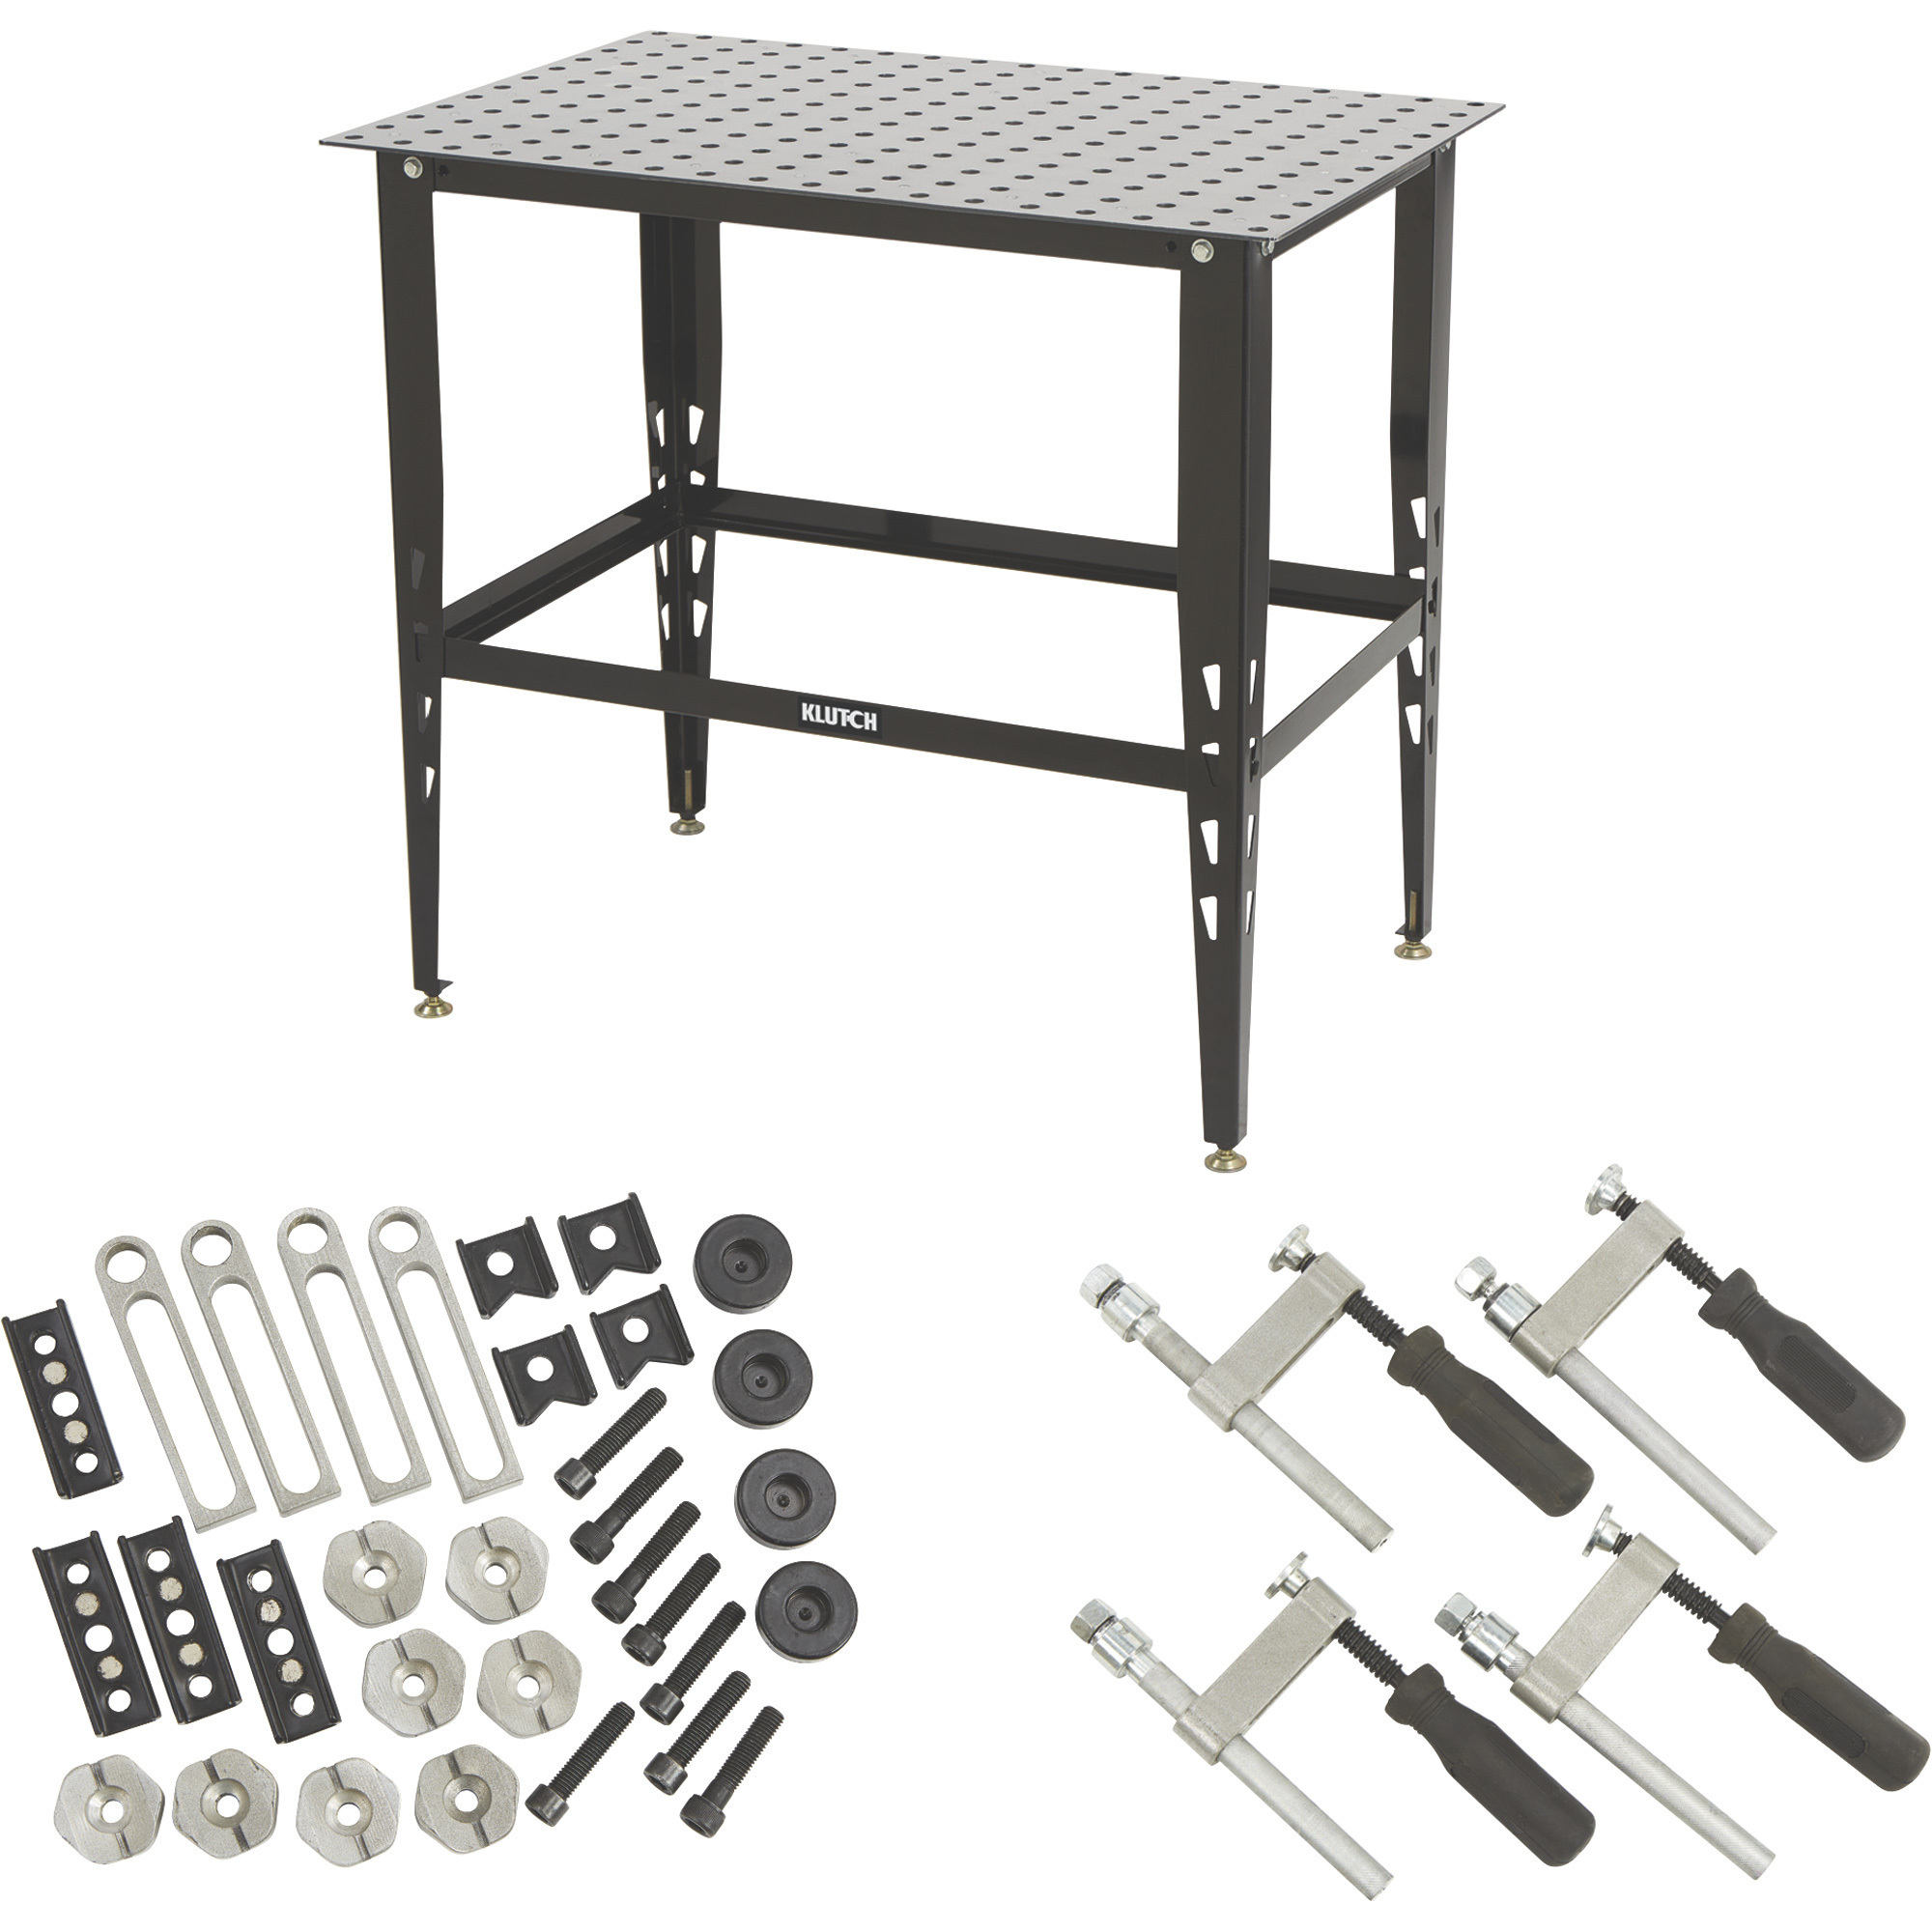 Klutch Steel Welding Table with Tool Kit, 36Inch L x 24Inch W x 33 1/4Inch H